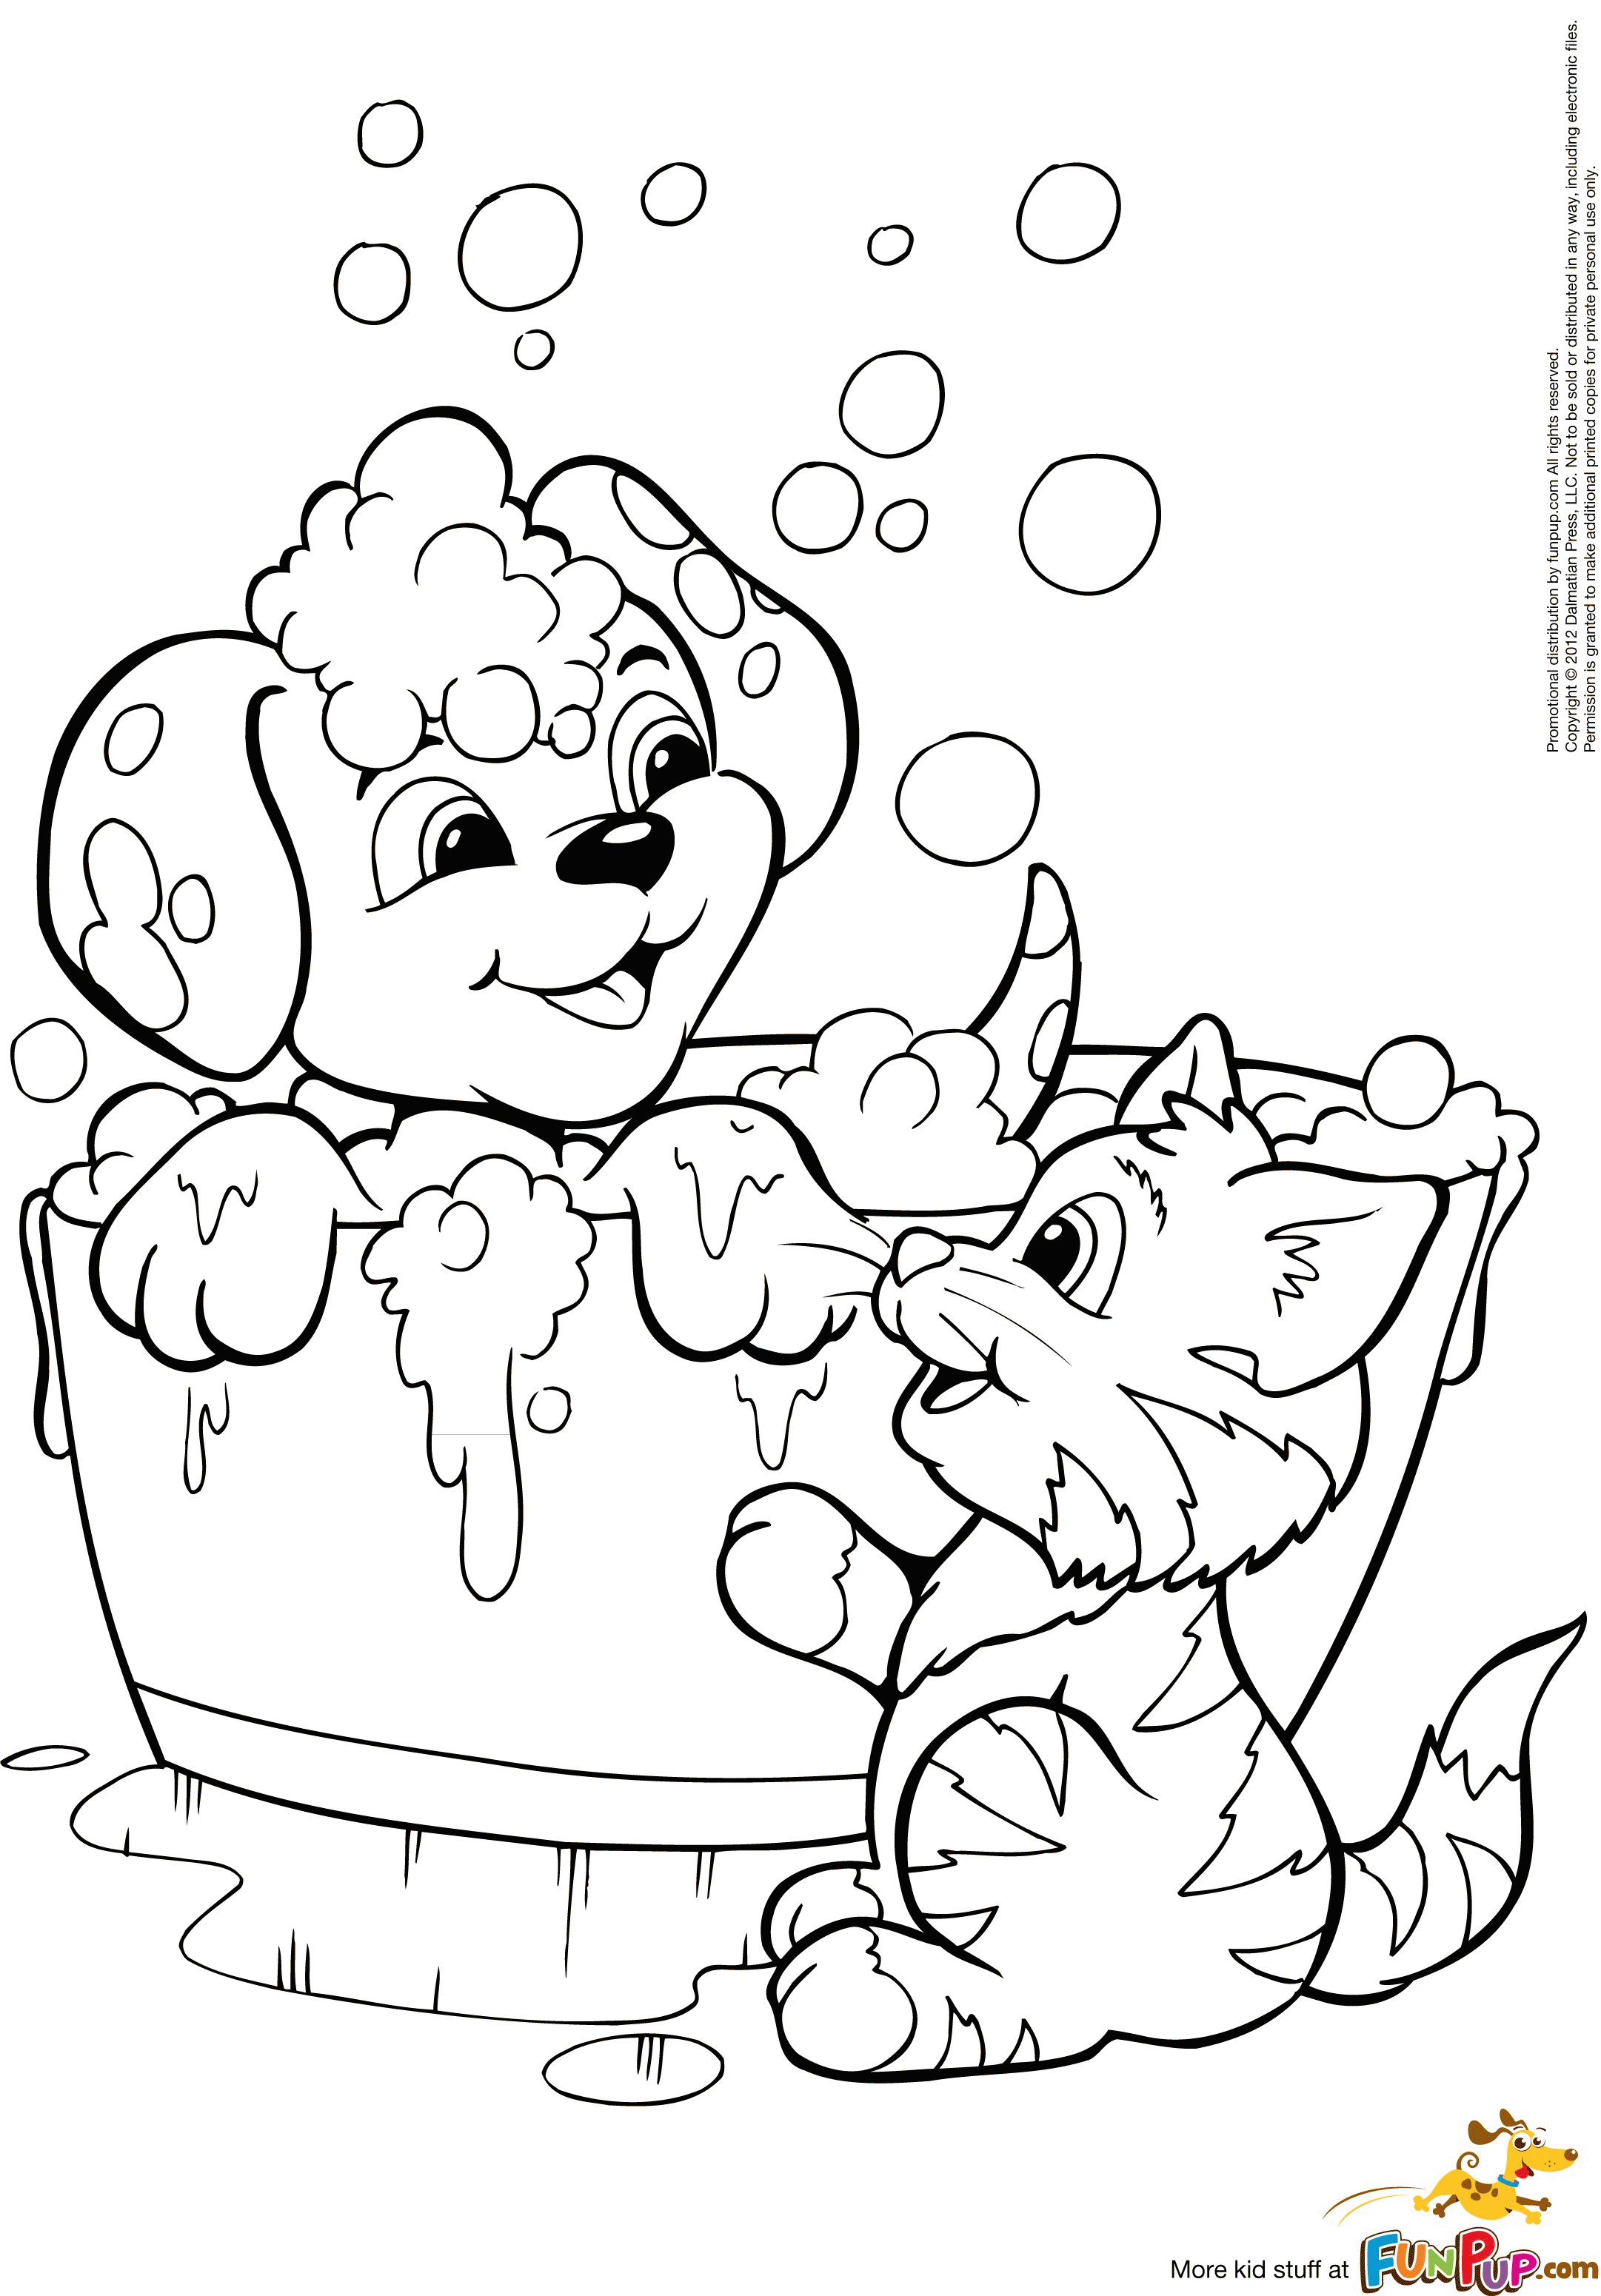 Download Kitten And Puppy Coloring Pages To Print - Coloring Home